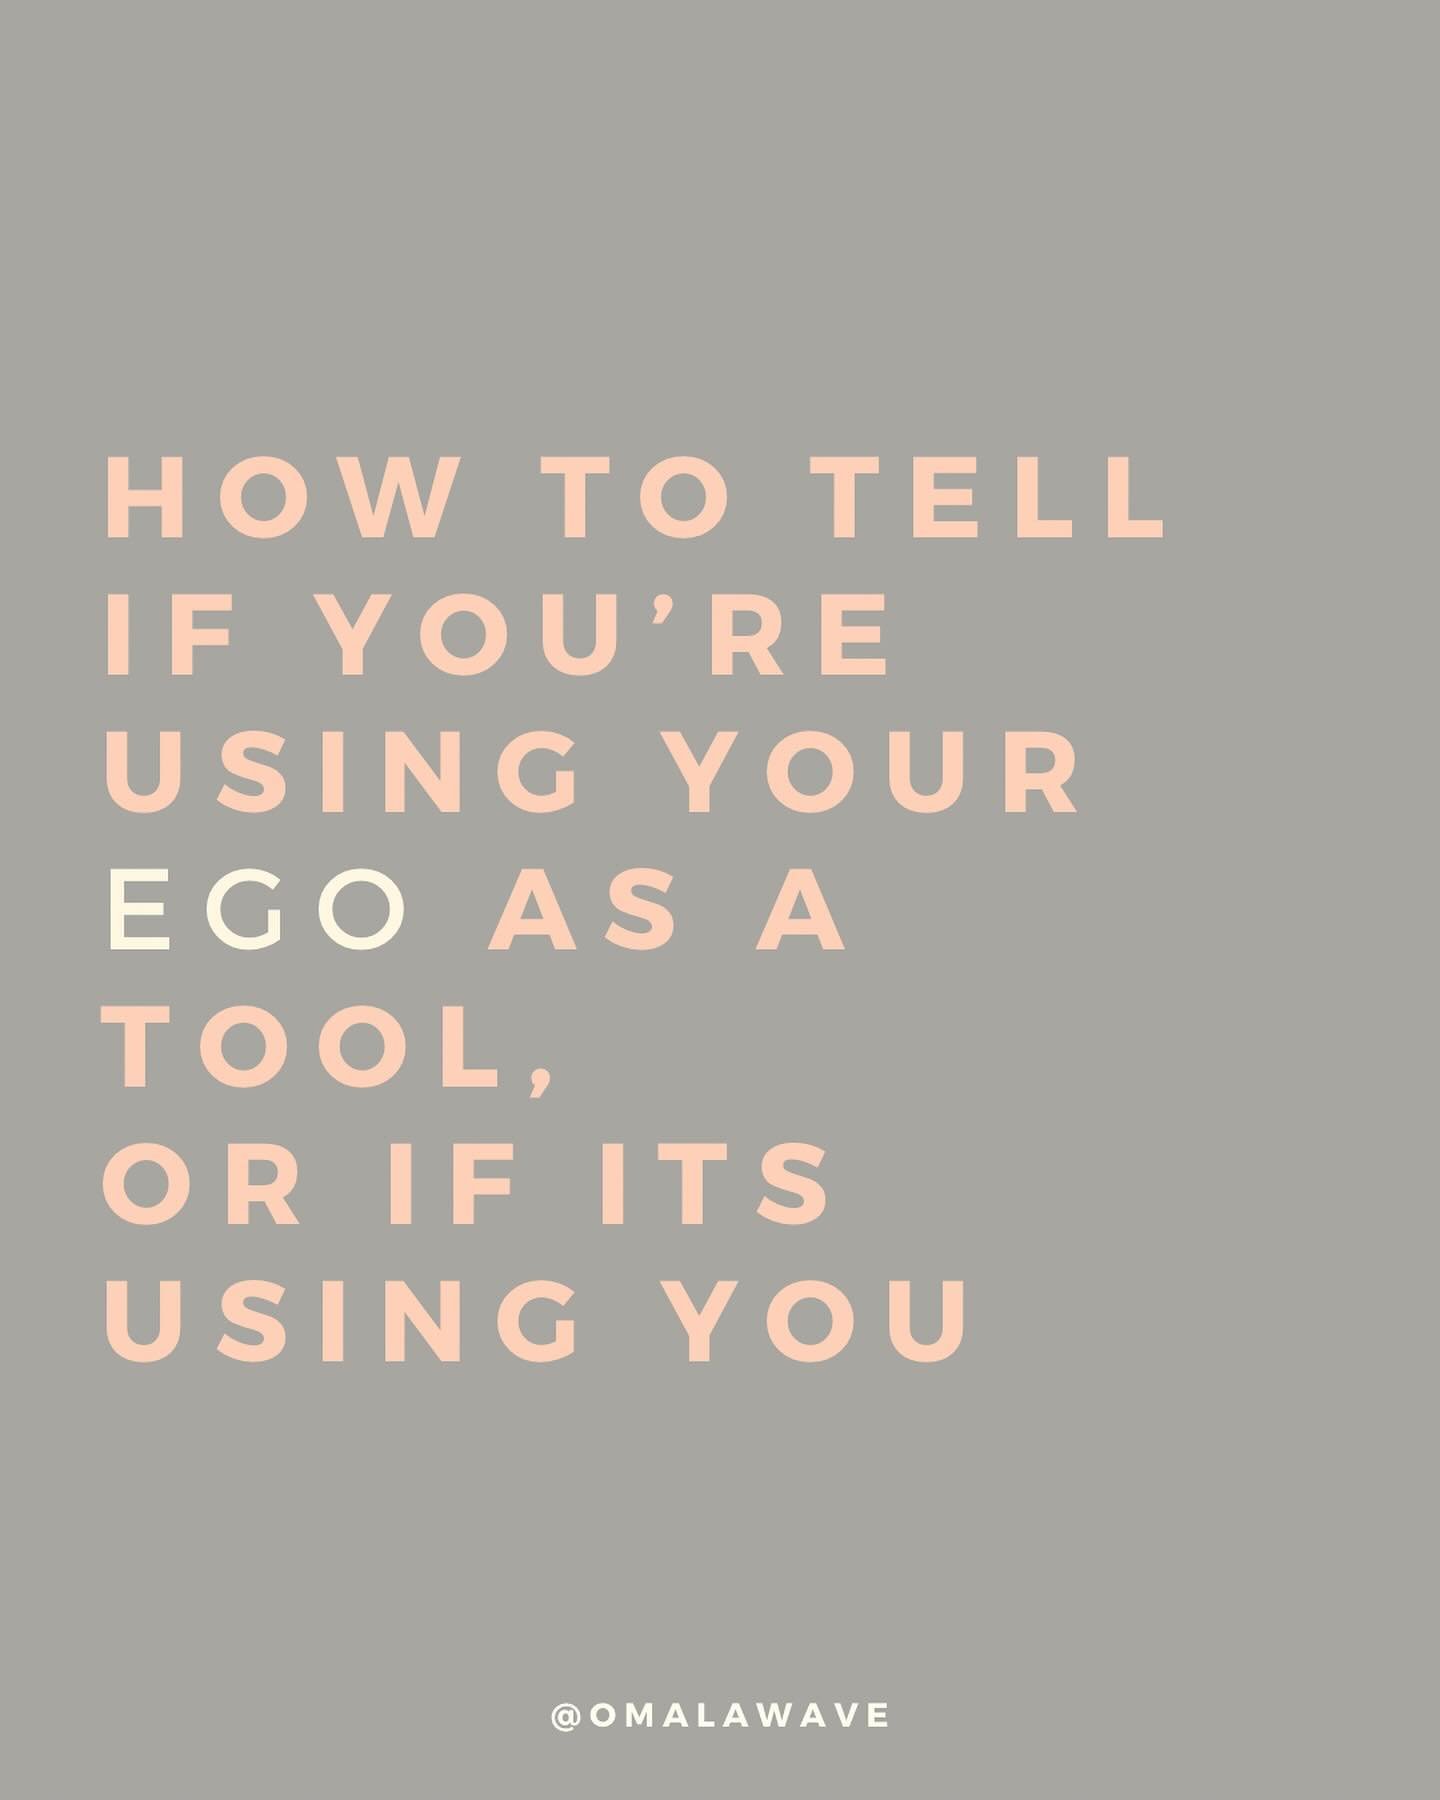 Your Ego is a tool.

Sharpen it with:

kindness
compassion
insight
understanding
gratitude
trust 
patience 

It will become blunt when:

you worry
compare
get angry
victimize 
hate
are jealous 
fearful
dishonest

Be careful how you use it and make su